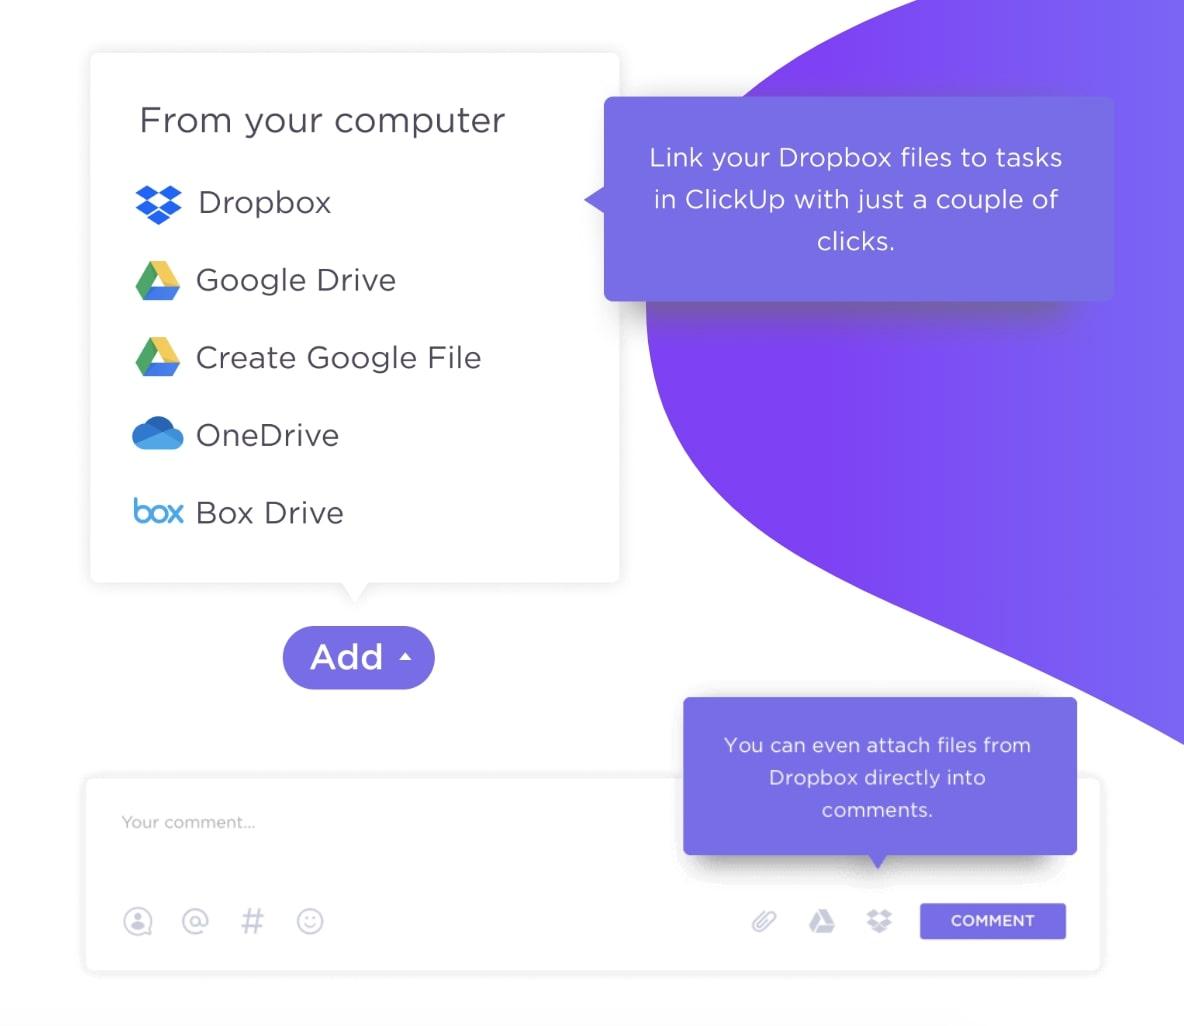 Cloud collaboration: attaching Dropbox files in tasks and in comments